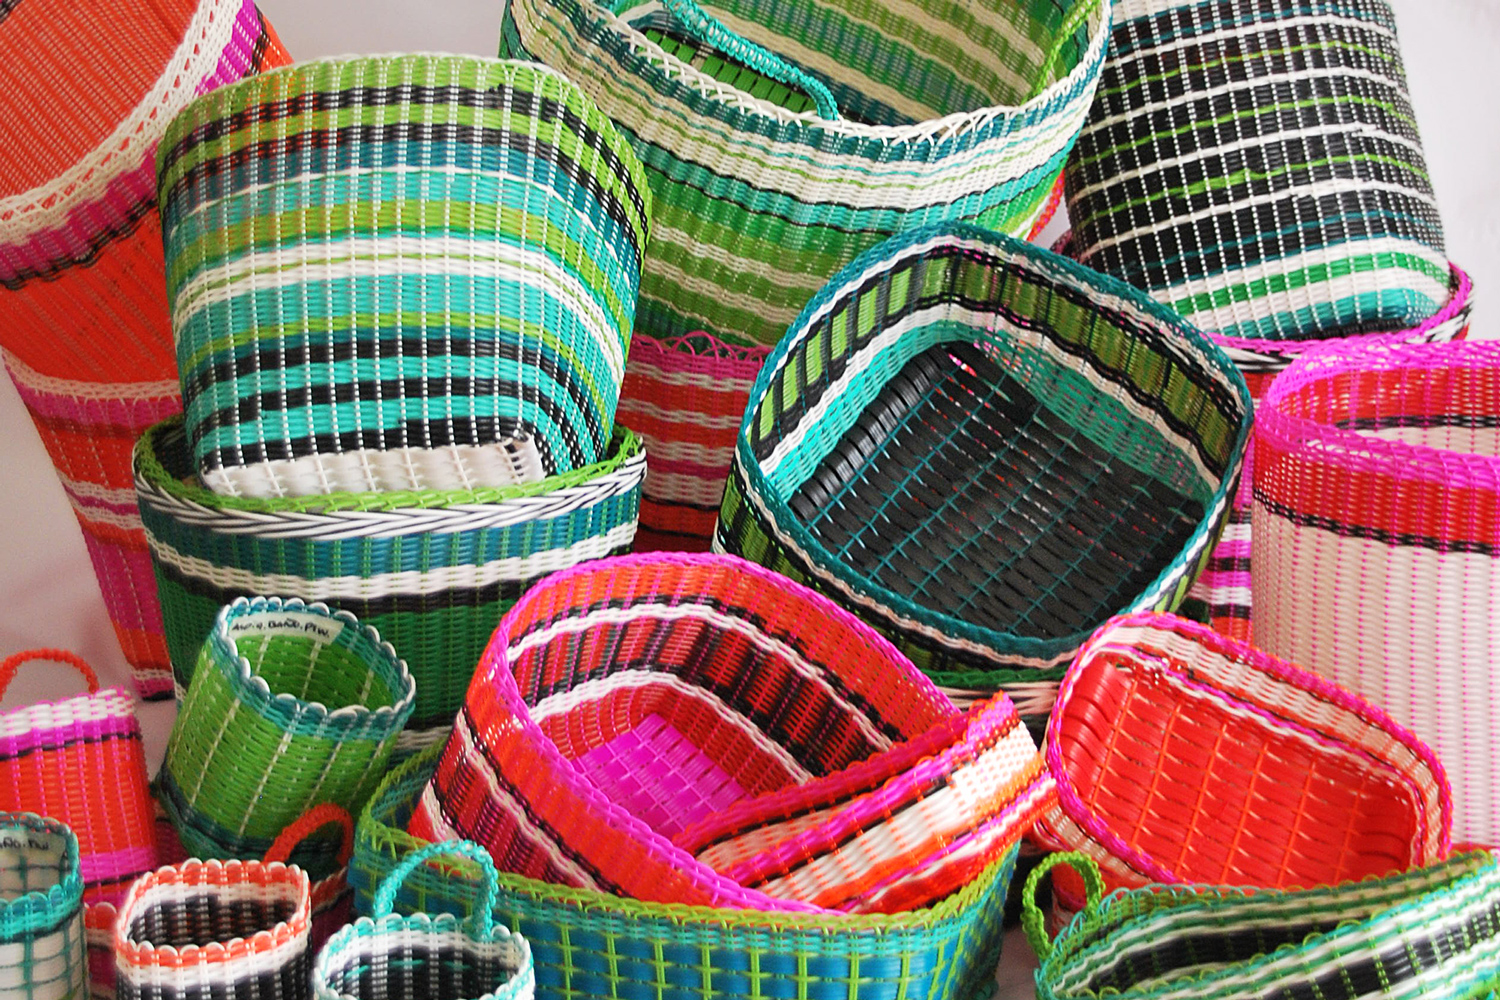 Prototypes of all objects made with the technique of weaving PVC thread